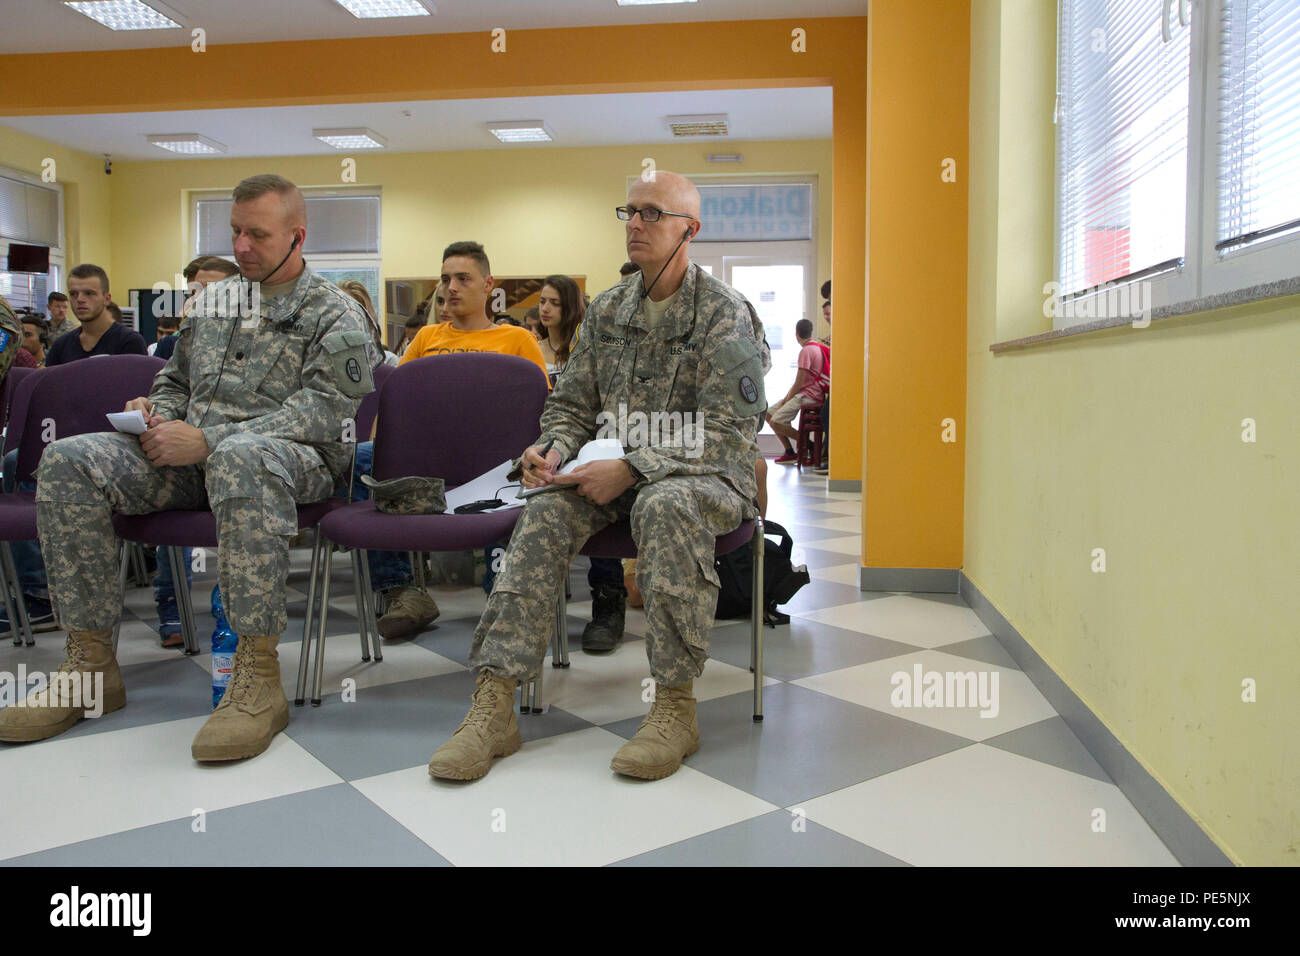 U.S. Army Lt. Col. William Gray (left), commander for 1st Combined Arms Battalion, 252nd Armor Regiment, and Col. Vernon Simpson, commander of the 30th Armored Brigade Combat Team and Multinational Battle Group-East, listen during a Violence Free Future workshop discussion to promote tolerance in Kosovo, Sept. 19, 2015, in Mitrovica, Kosovo. Simpson and Gray are both North Carolina National Guard leaders for units deployed to Kosovo as part of NATO’s Kosovo Force peace support mission. The workshop, along with a Play2Educate youth event, was sponsored by the U.S. Embassy and led by Rotary Club Stock Photo